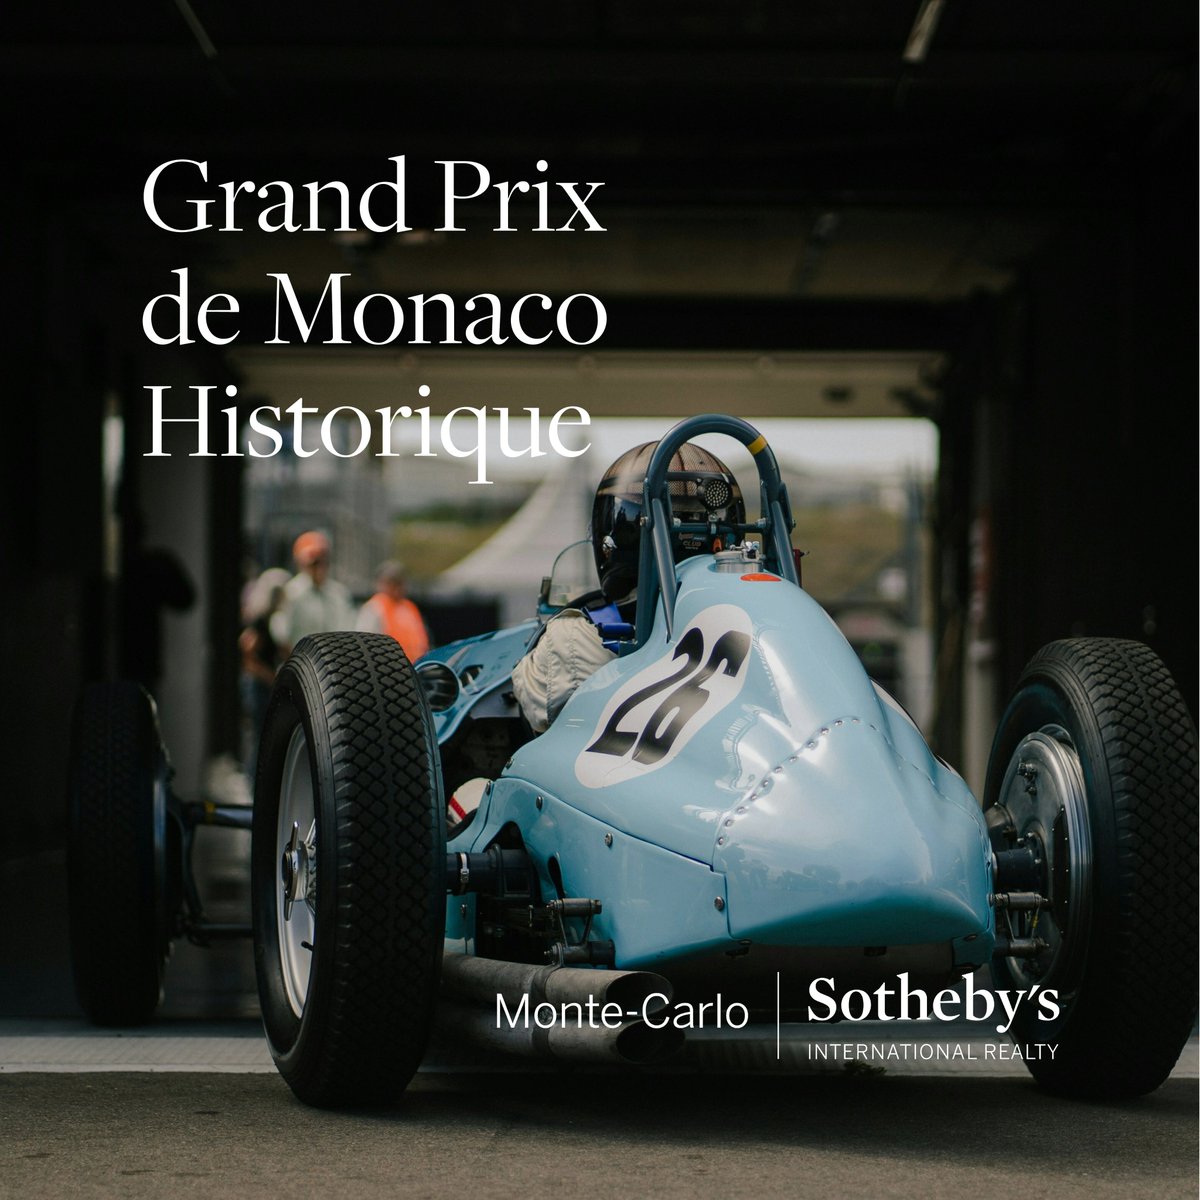 14th Grand Prix de Monaco Historique - Today and tomorrow, old cars will have races on the iconic tracks of the Monaco Circuit, a nostalgic but exciting atmosphere !

#grandprix #historic #oldcar #oldcars #monacogp #race #tracks #monaco #monacocircuit #nostalgy